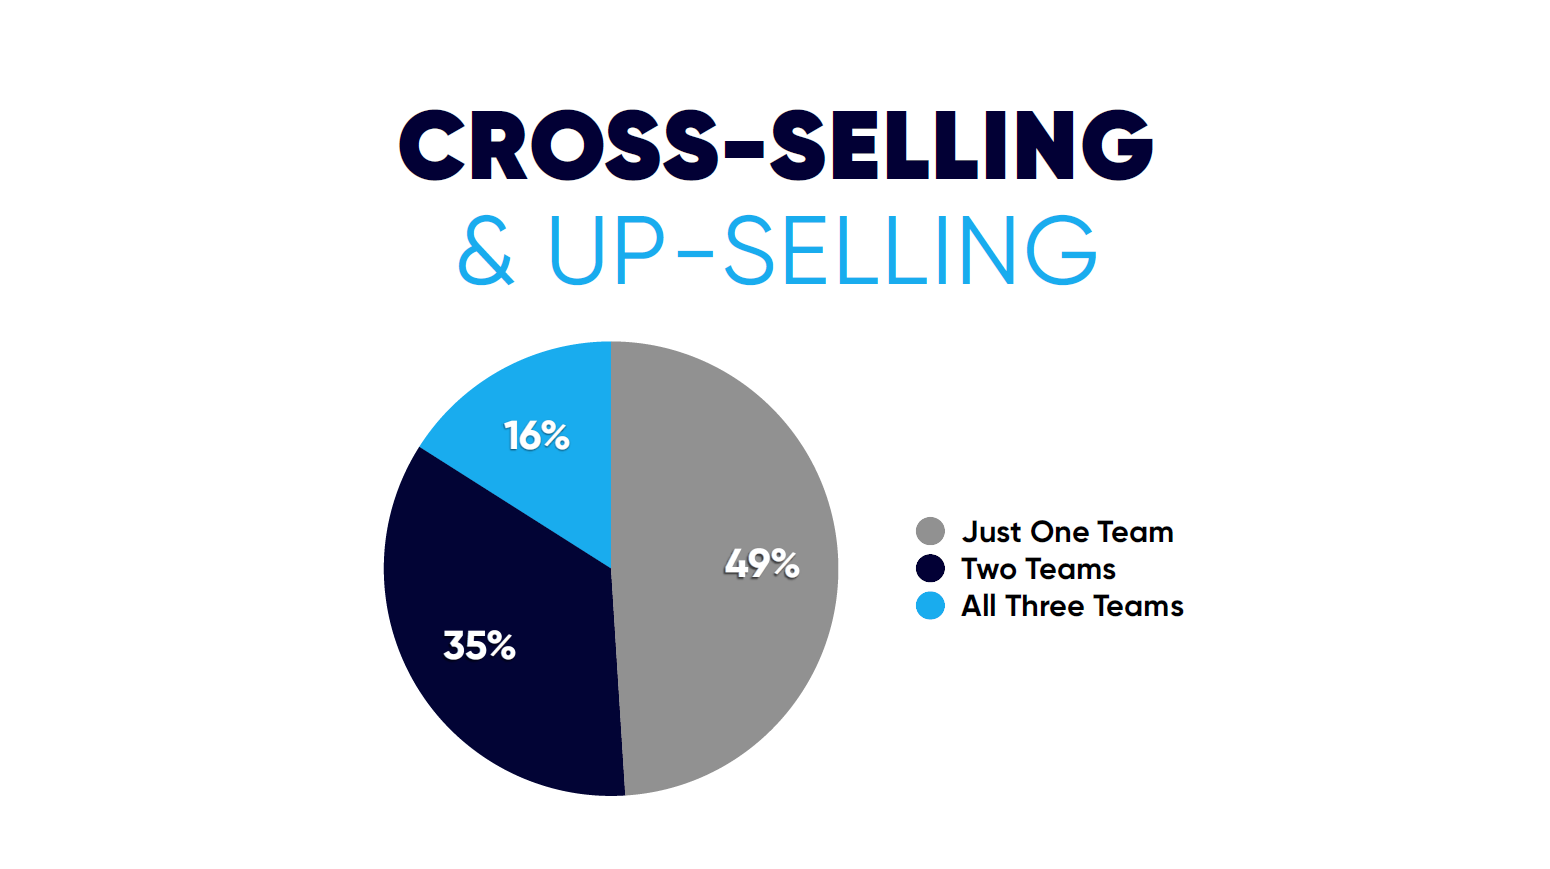 Cross-selling and up-selling across integrated digital teams